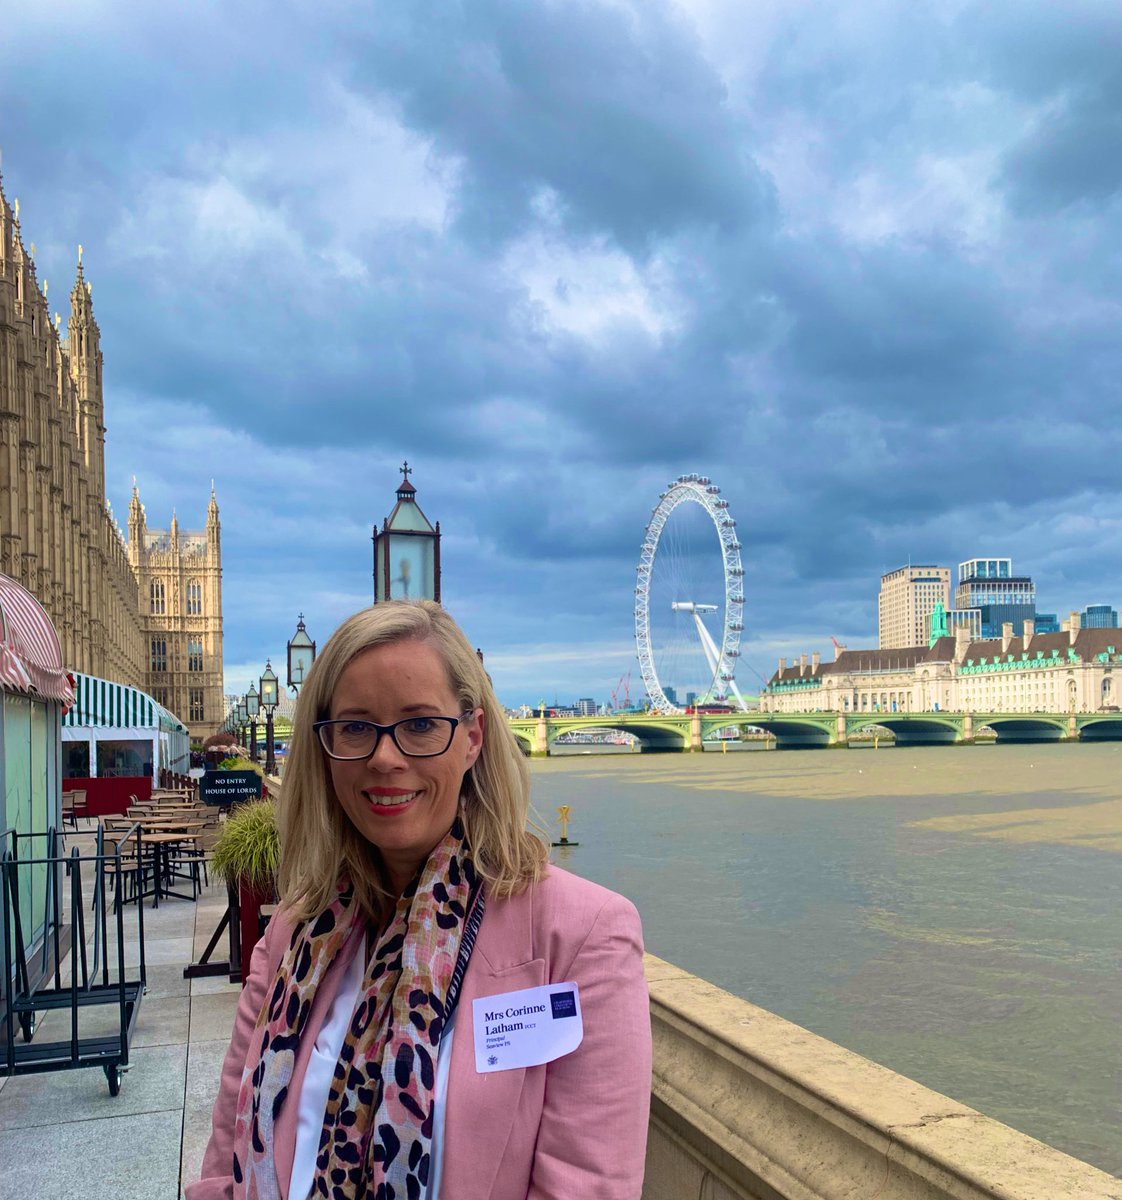 On Wednesday, I was a guest of Baroness Morris of Yardley at the House of Lords for a discussion on ethical leadership and professionalism. Thank you to @CharteredColl for this amazing opportunity.